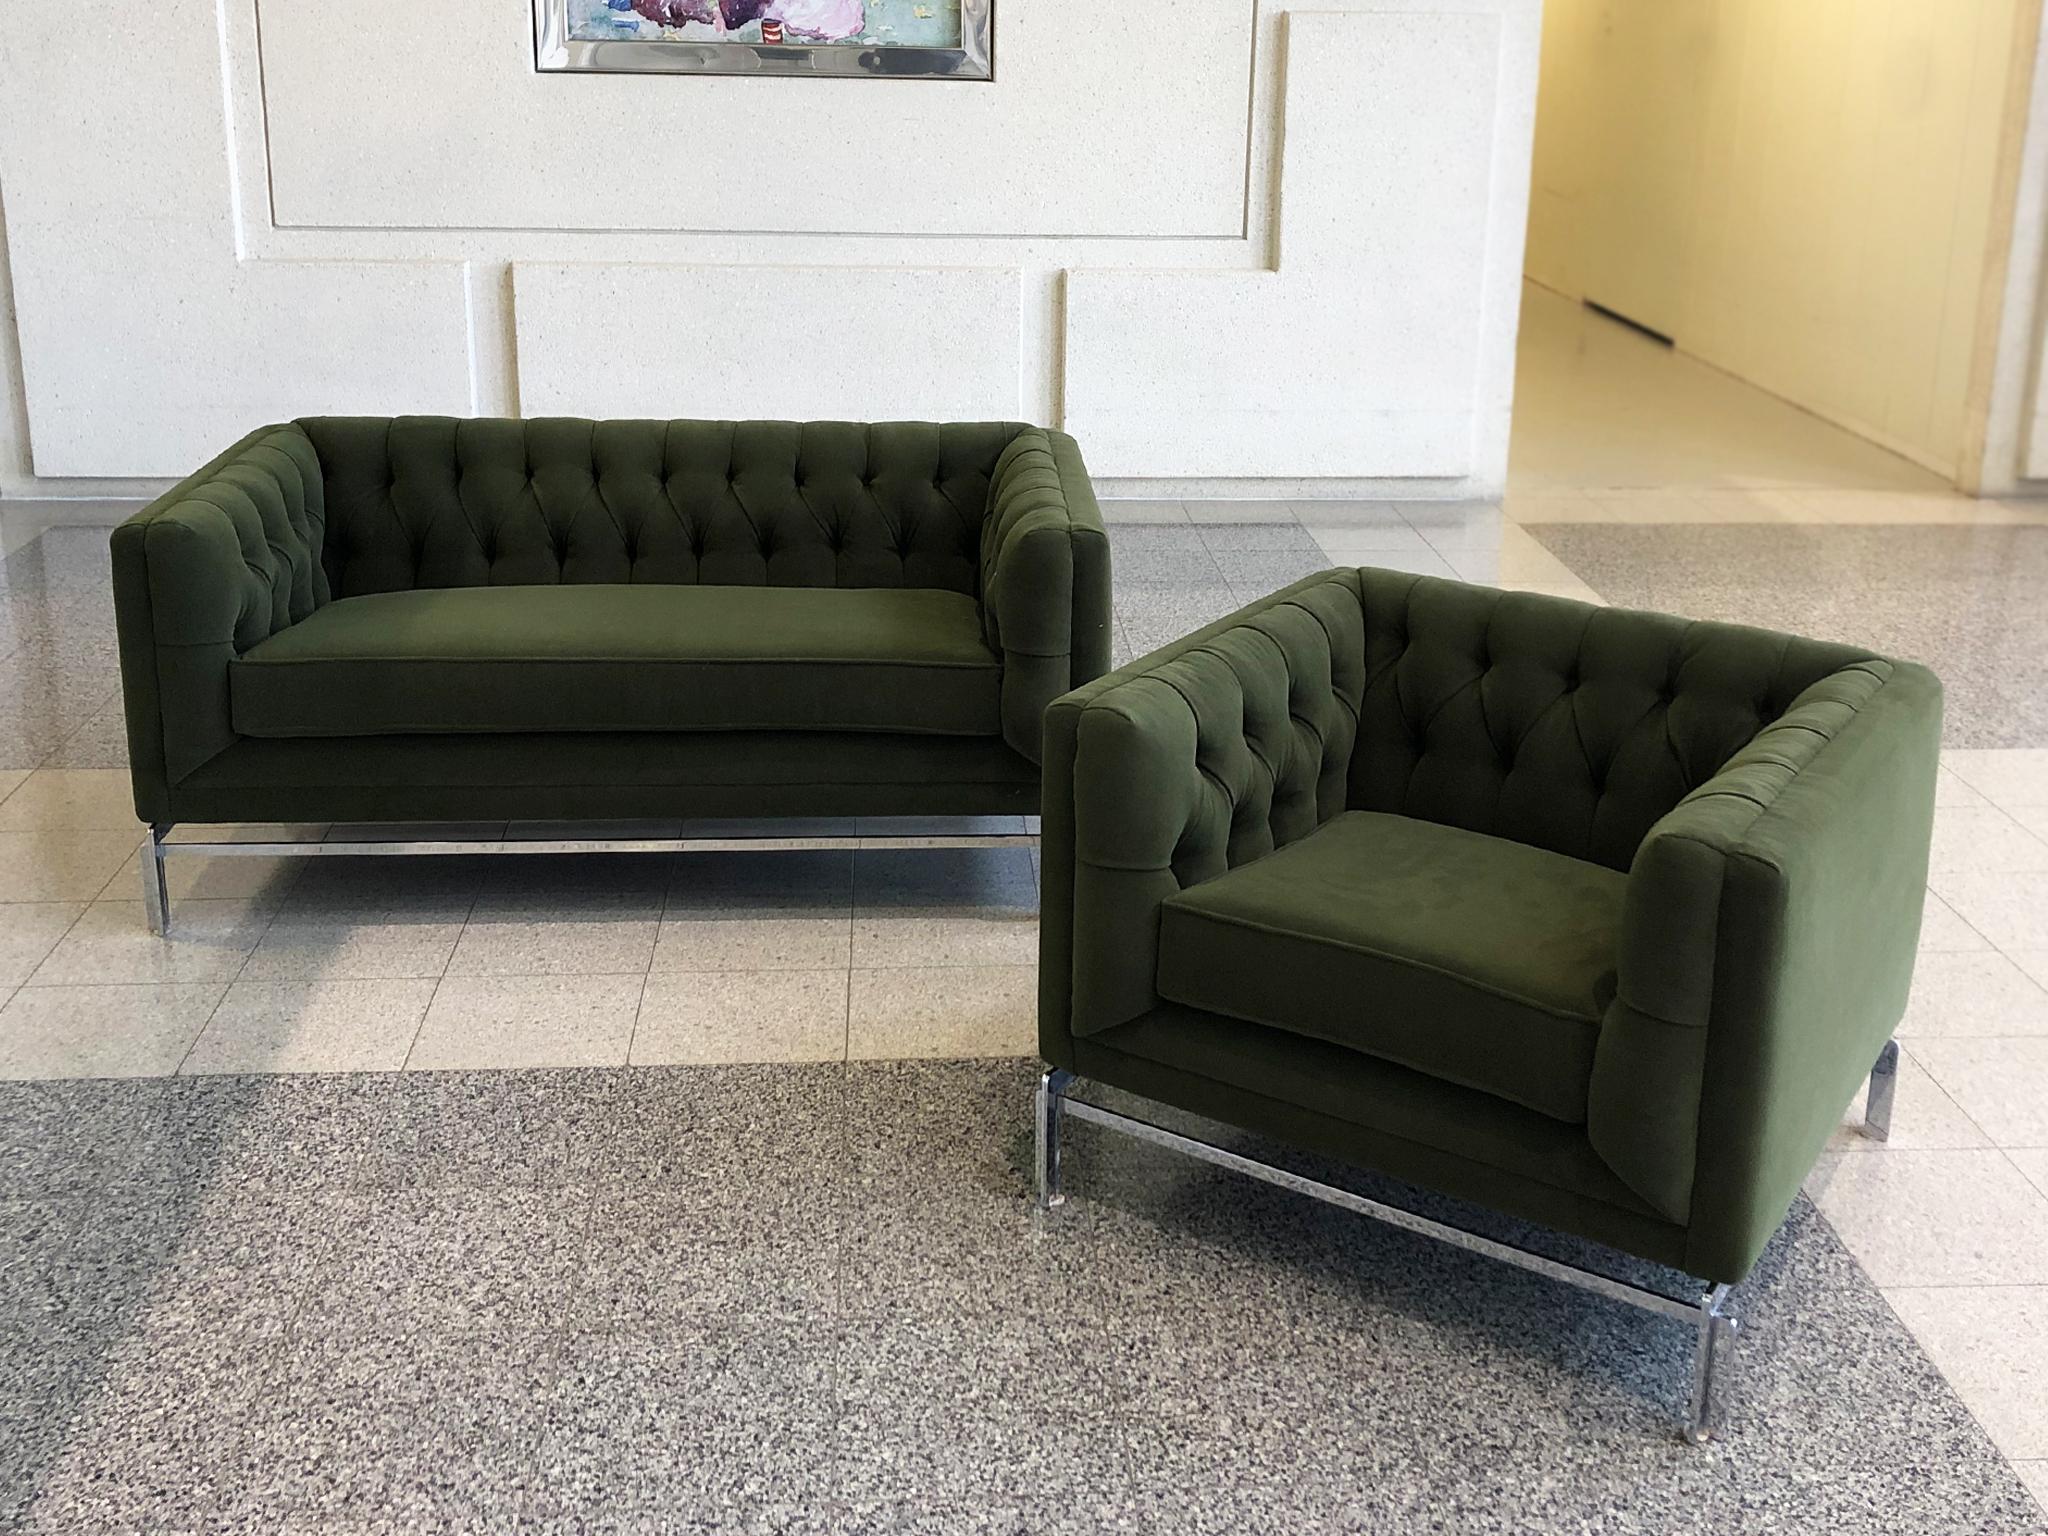 An exquisite set of newly reupholstered settee and club chair attributed to Stow & Davis. This pair is in the manner of Knoll. They are a modern take on the classic Chesterfield. Button-tufted back and arm cushions are set in an elegant, slickly